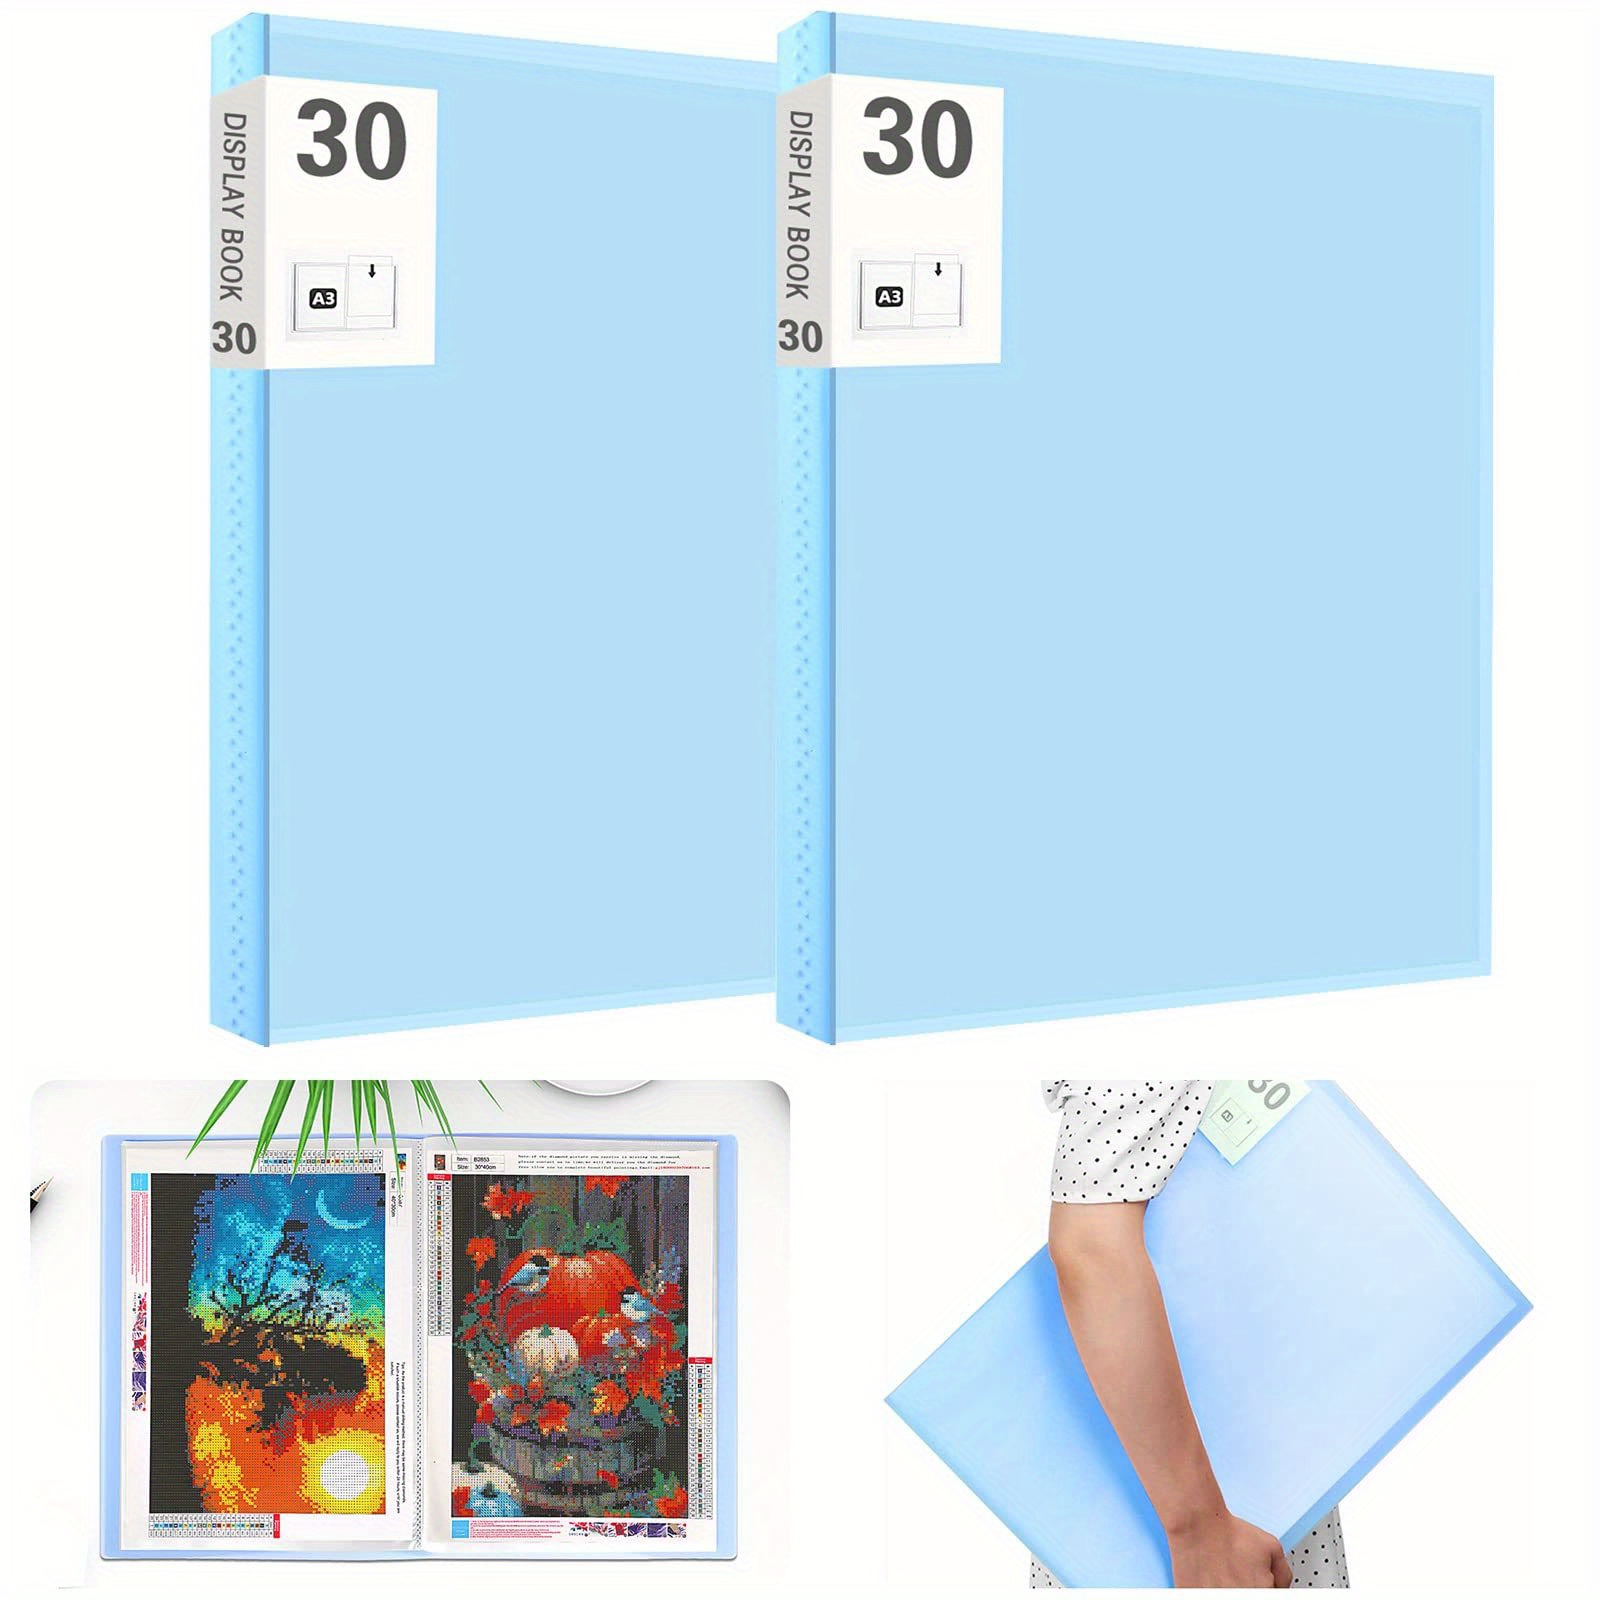 SDJMa A3 Sized Diamond Painting Storage Book, 17.3x12.8in Art Portfolio  Presentations Folder with 30 Pages Protectors for Painting, Drawing, Test  Paper, File 